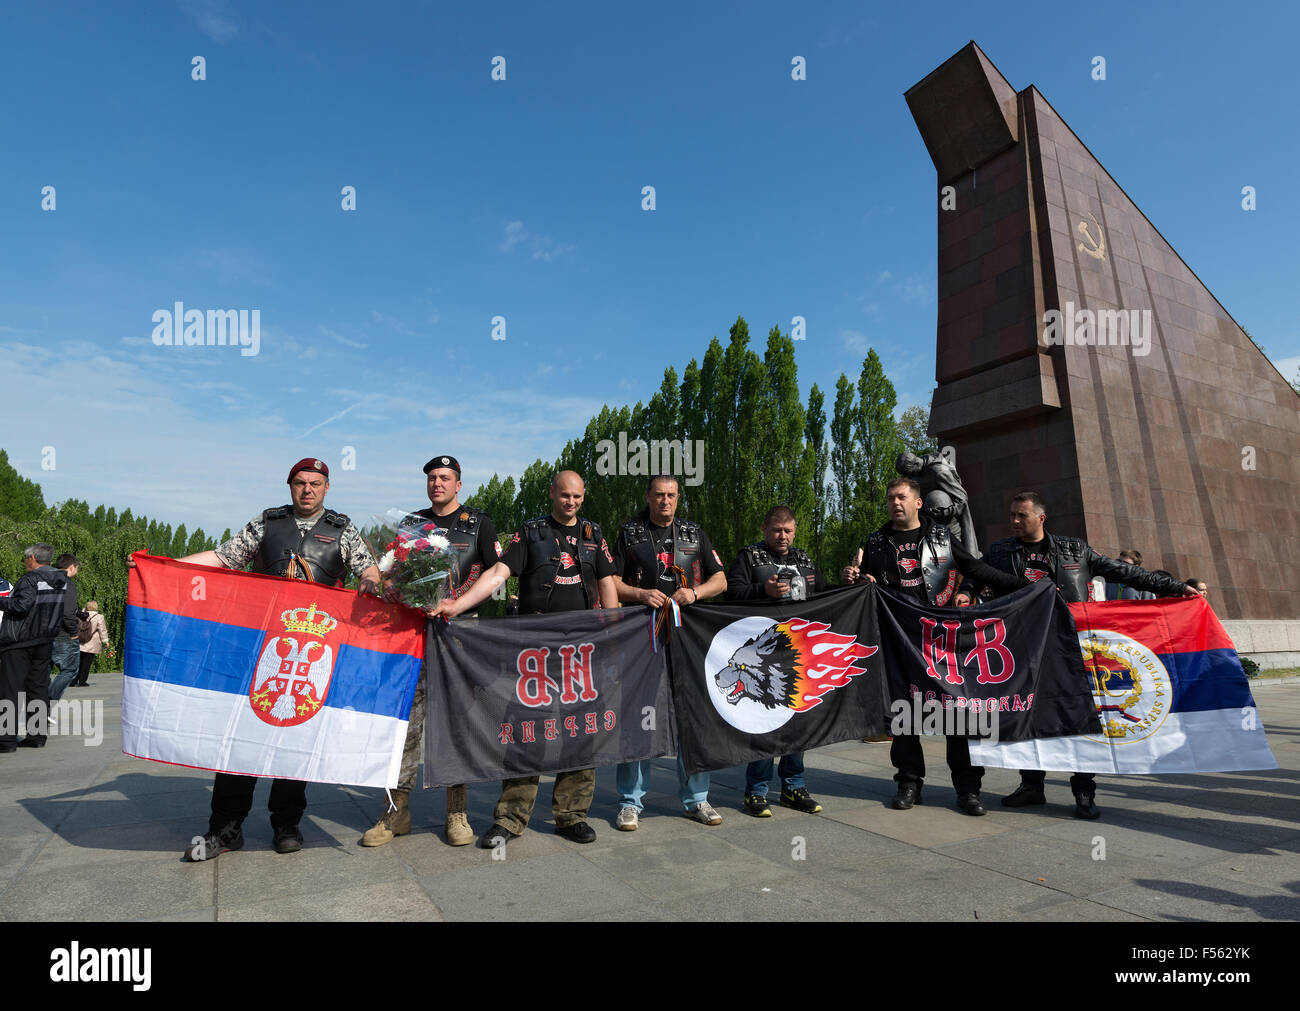 '09.05.2015, Berlin, Berlin, Germany - Soviet War Memorial Treptow, the 70th anniversary of the end of World War II that 9 May is considered in Russia as Victory Day over Nazi Germany, members of the Russian-nationalist Rocker group ''Nachtwoelfe'' Motorcycle Club, in the background Flag of the former Soviet Union. EBS150509D502CAROEX.JPG - NOT for SALE in G E R M A N Y, A U S T R I A, S W I T Z E R L A N D [MODEL RELEASE: NO, PROPERTY RELEASE: NO (c) caro photo agency / Schulz, http://www.caro-images.pl, info@carofoto.pl - In case of using the picture for non-journalistic purposes, please con Stock Photo